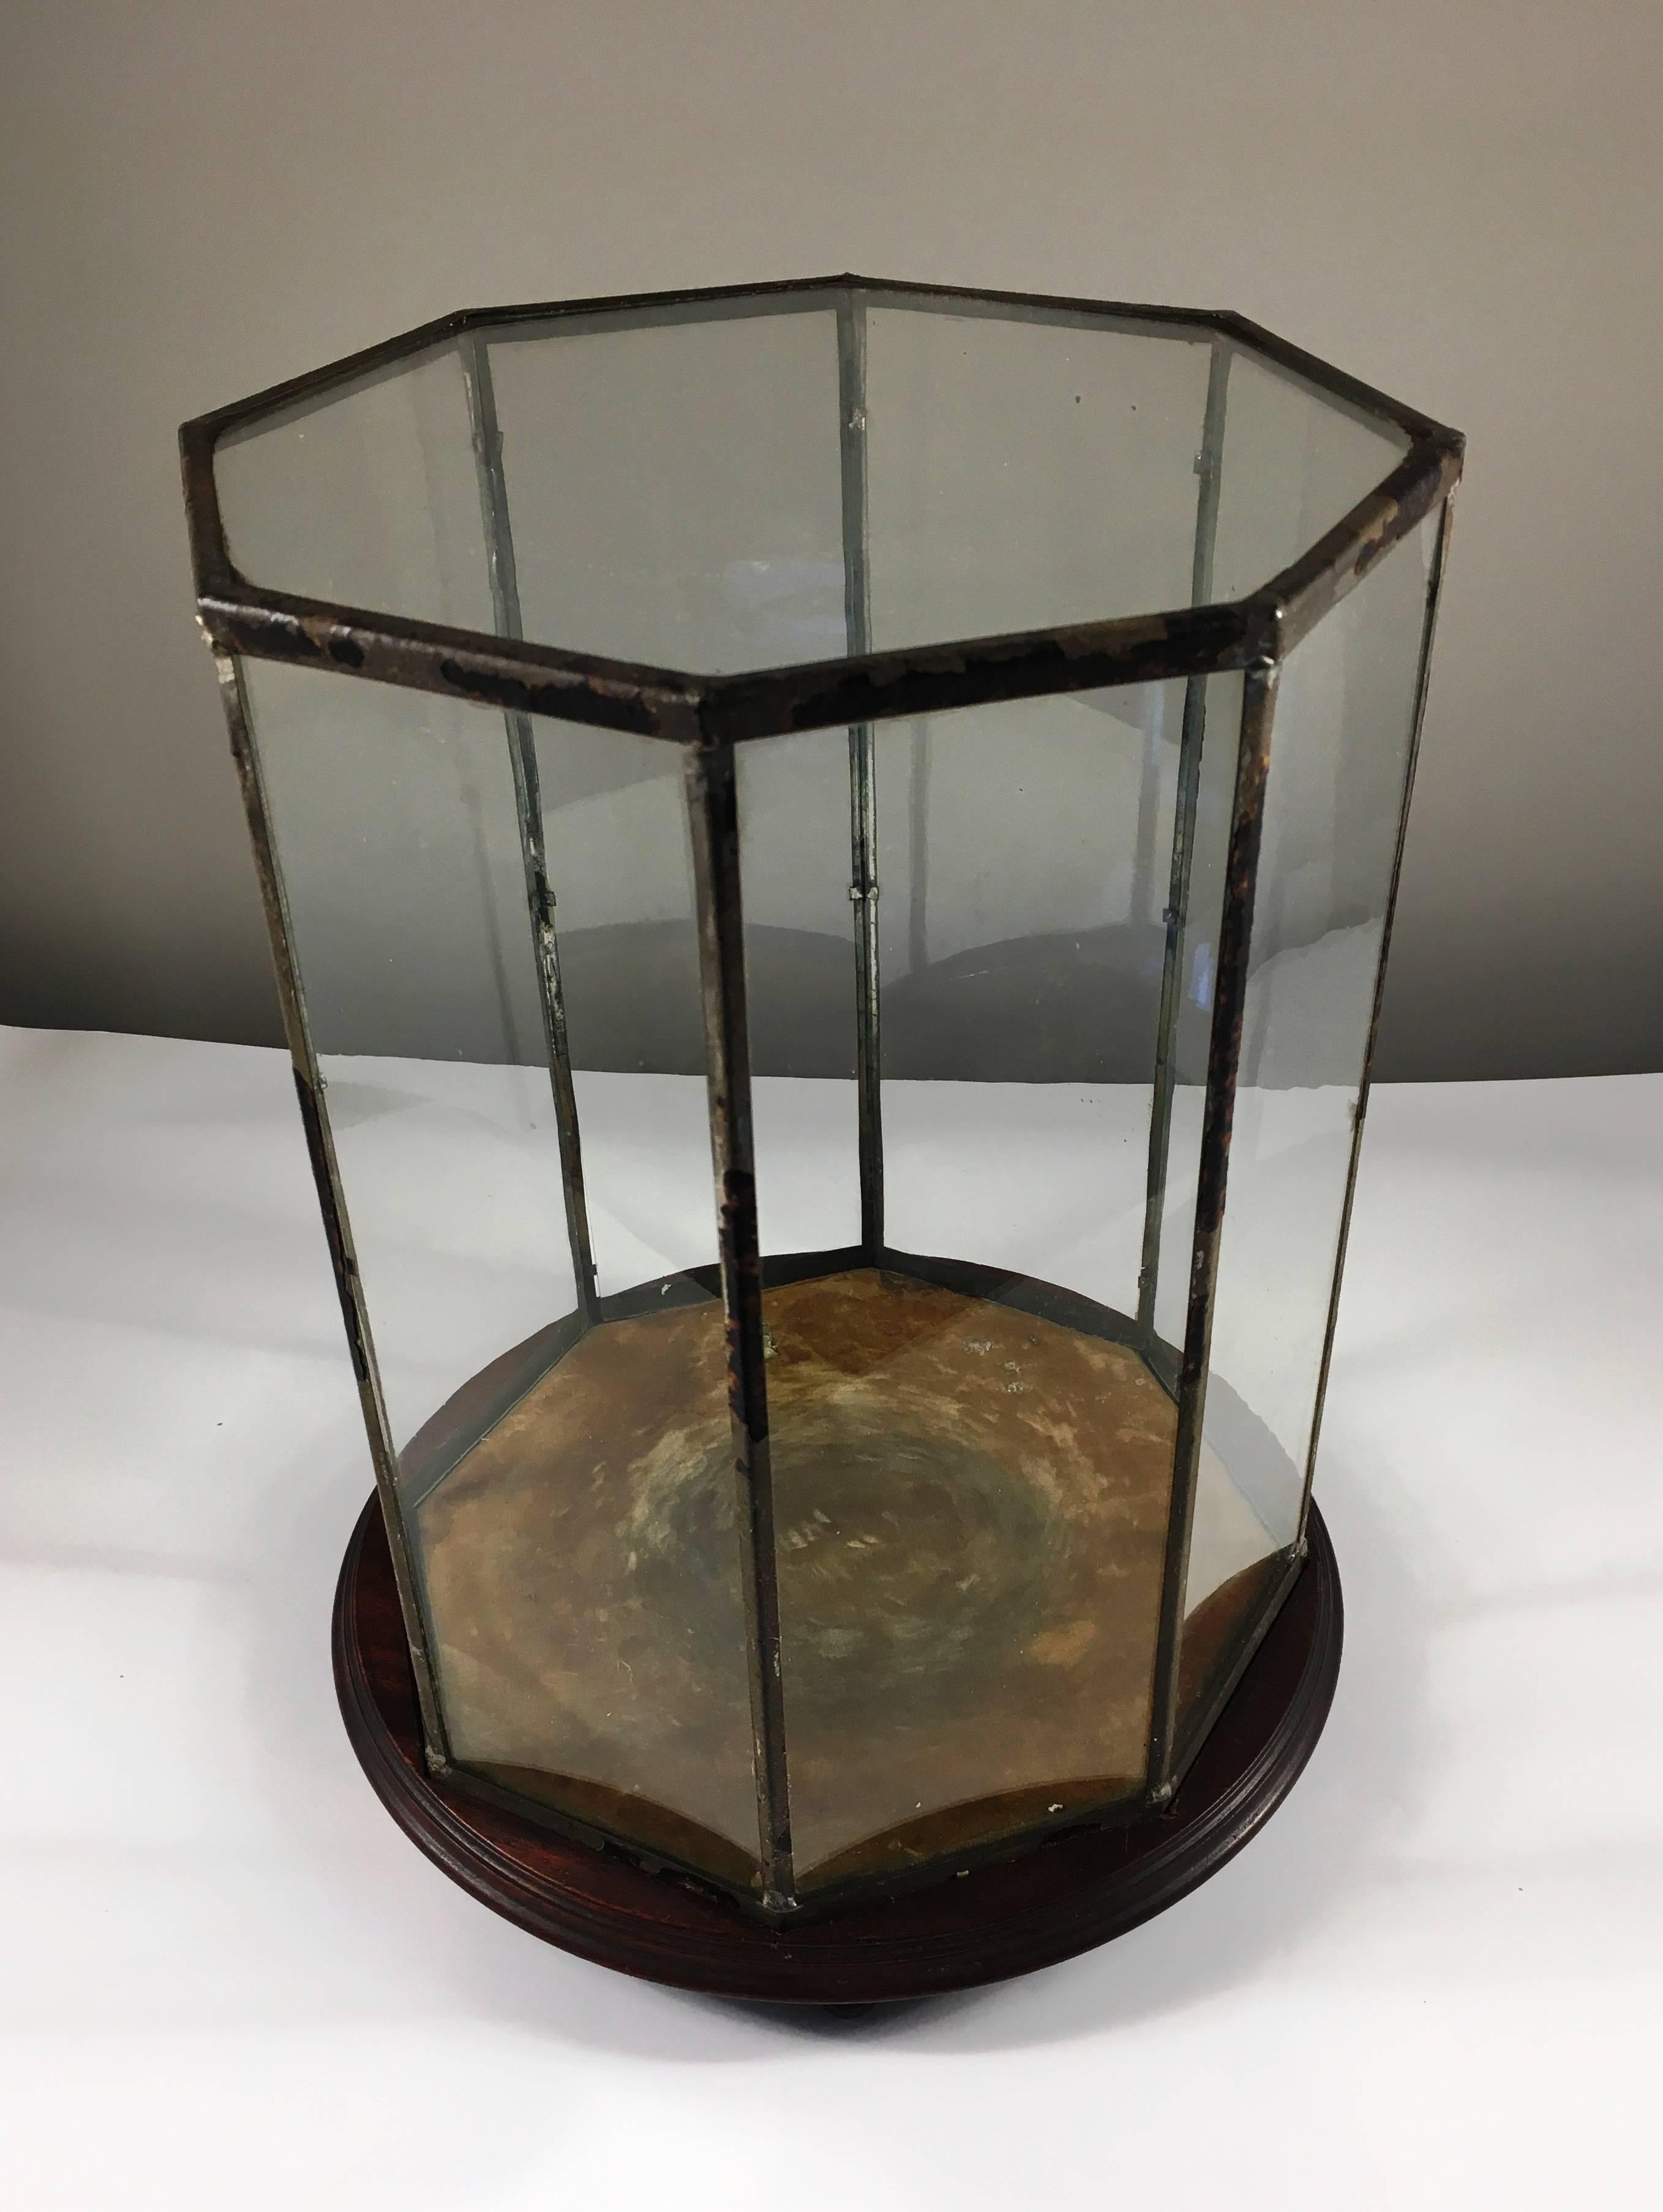 An unusual octagonal-form leaded glass specimen dome on a wood base, circa 1890 with a soldered tole frame.